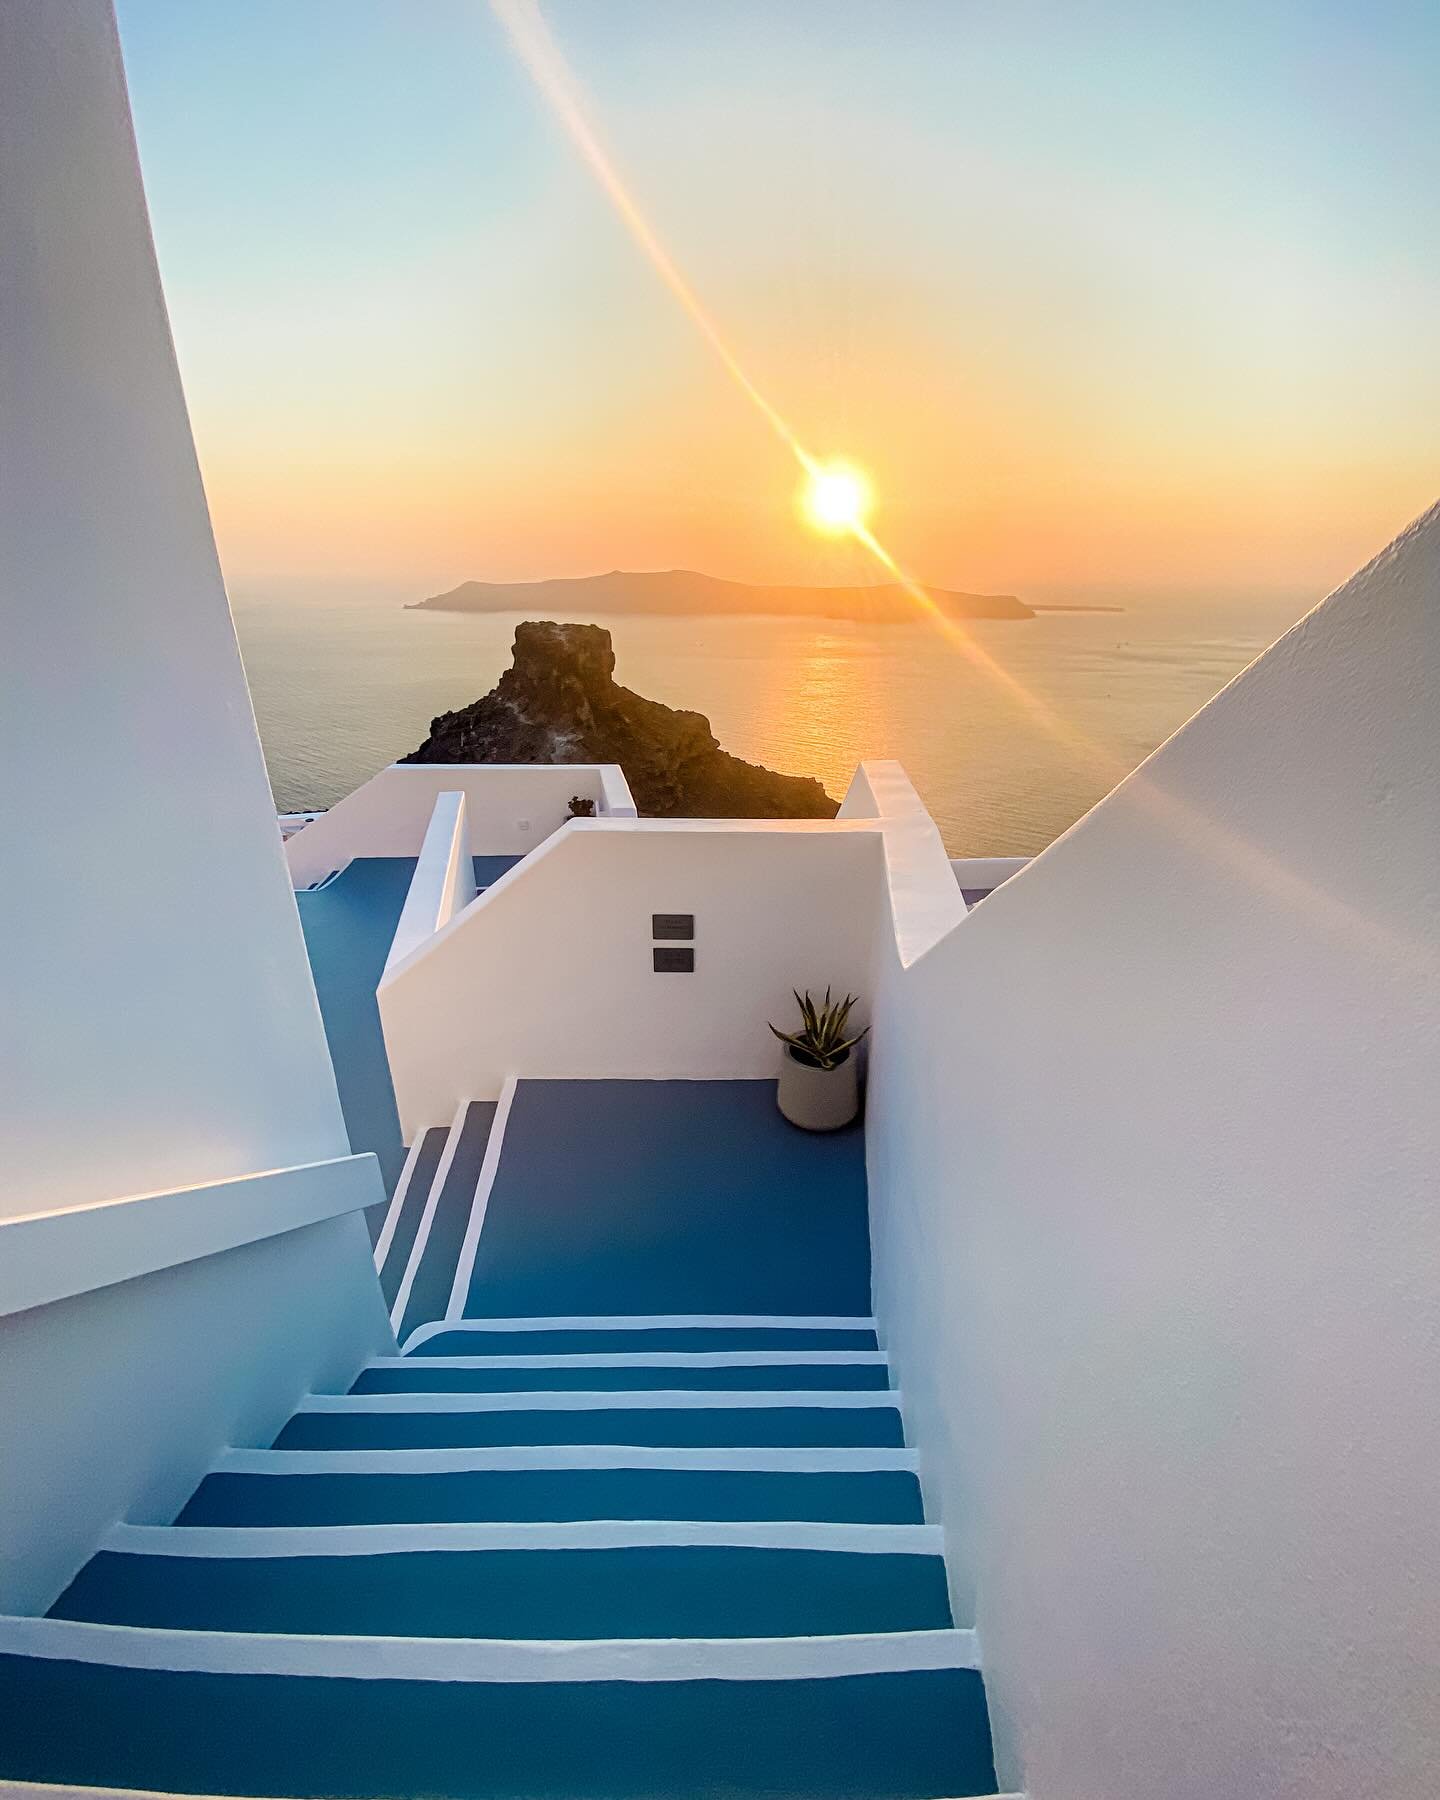 Is Santorini really as beautiful as photos make it out to be? Yes. Hard yes. No question. No hesitation. It&rsquo;s simply magical 🧚